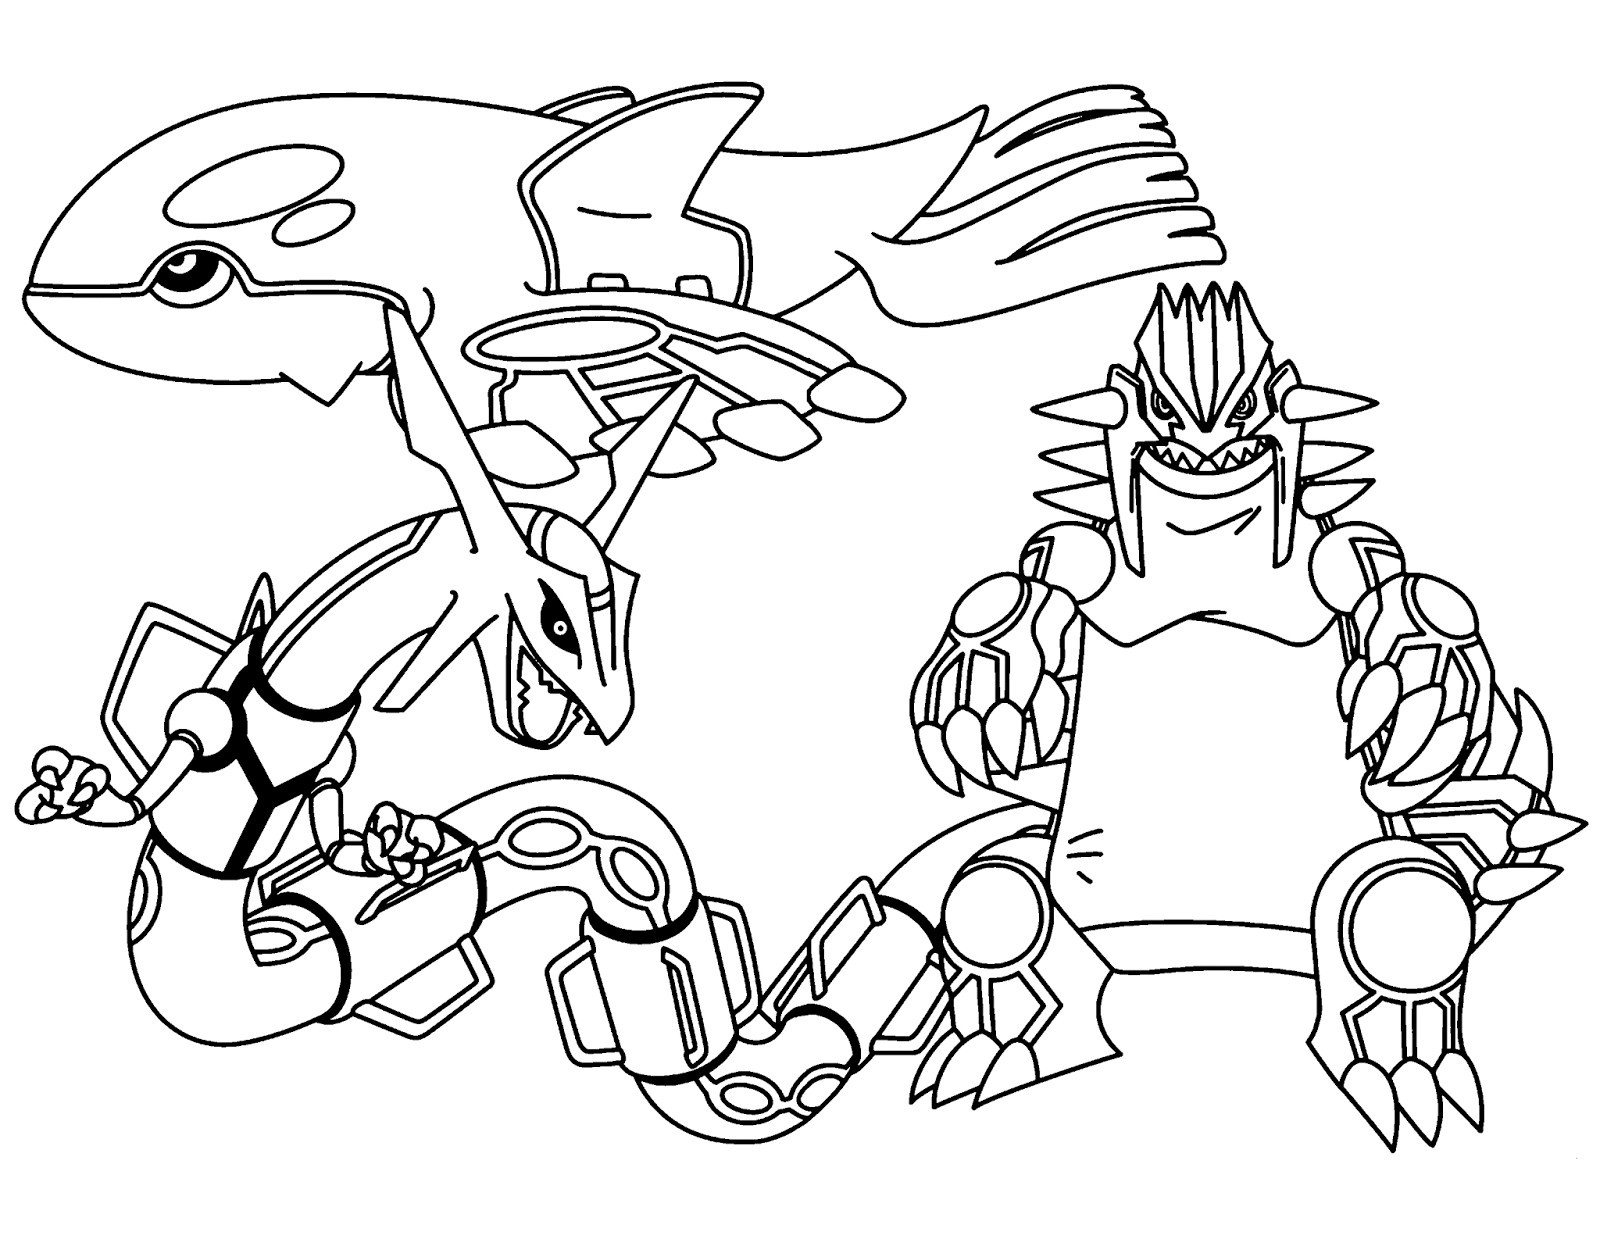 Legendary Pokemon Coloring Pages